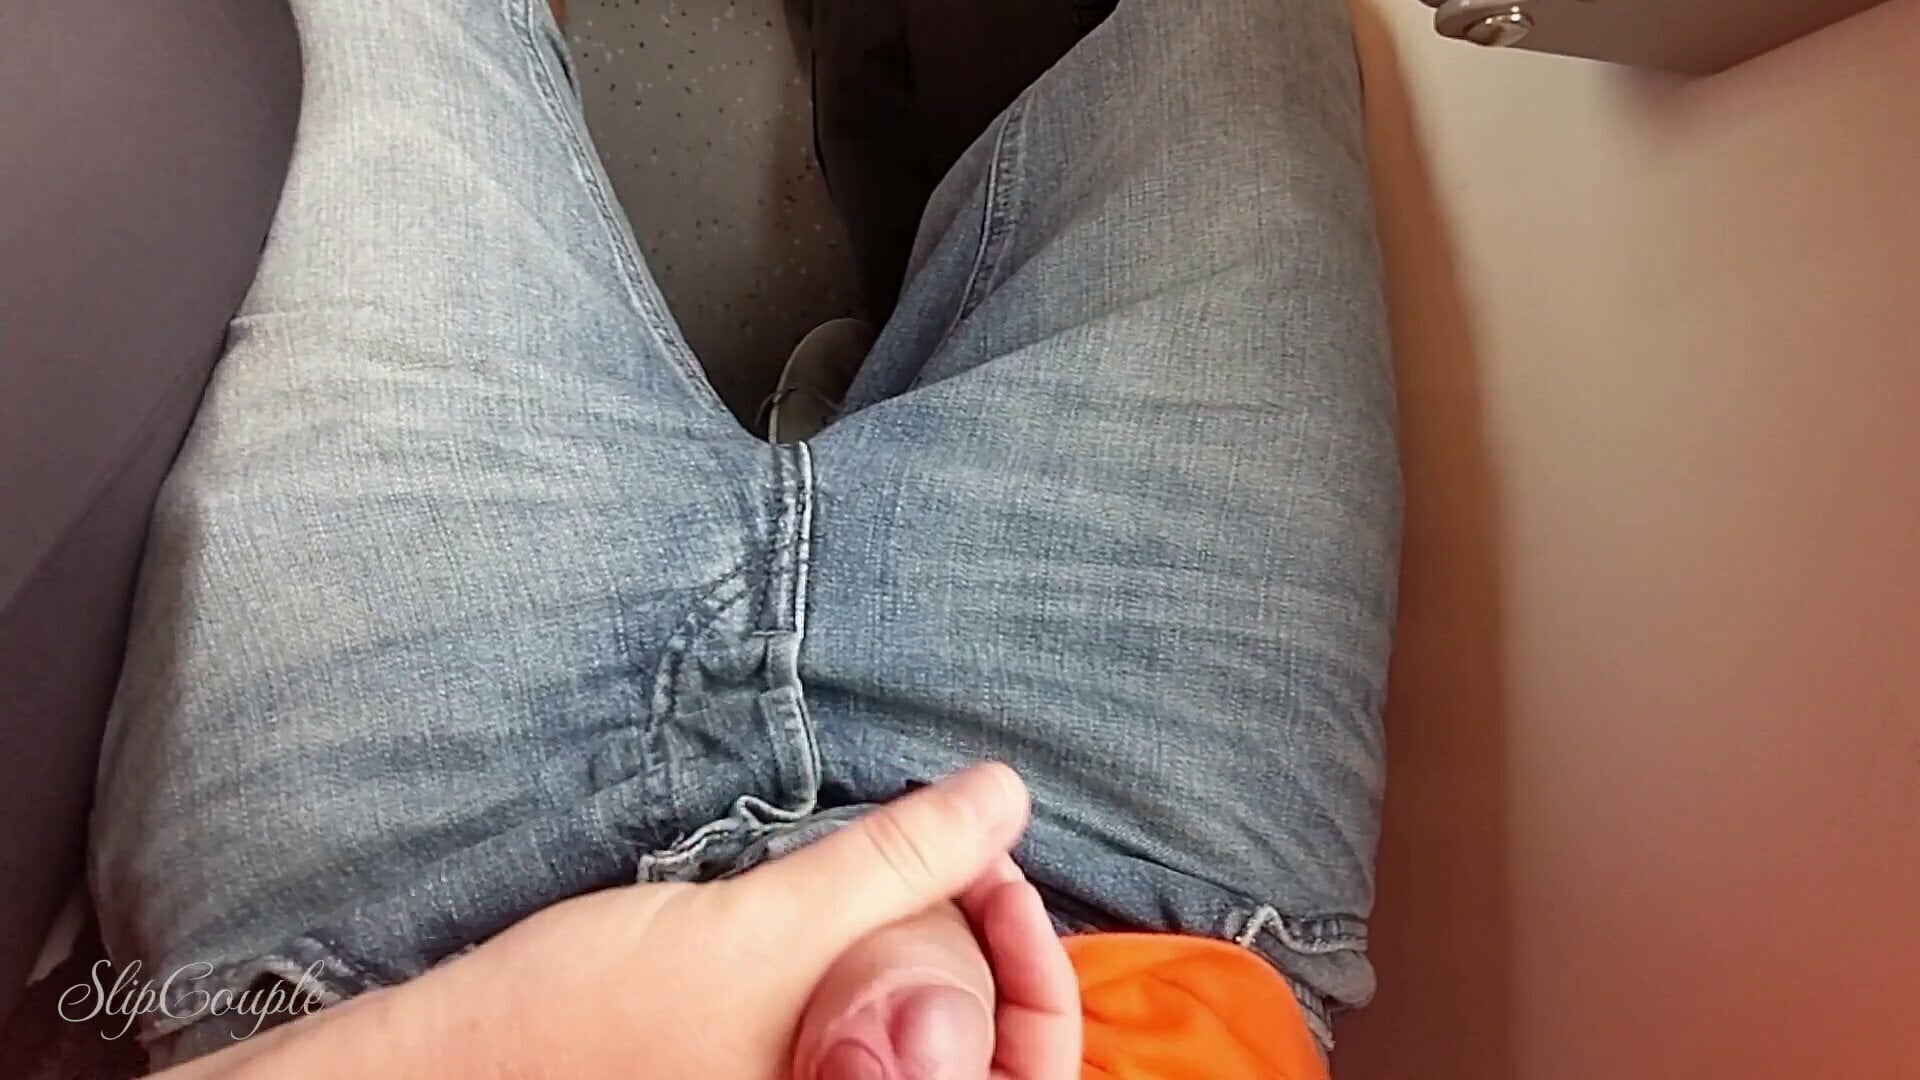 Risky outdoor travel – hand and blowjob in train and airplane